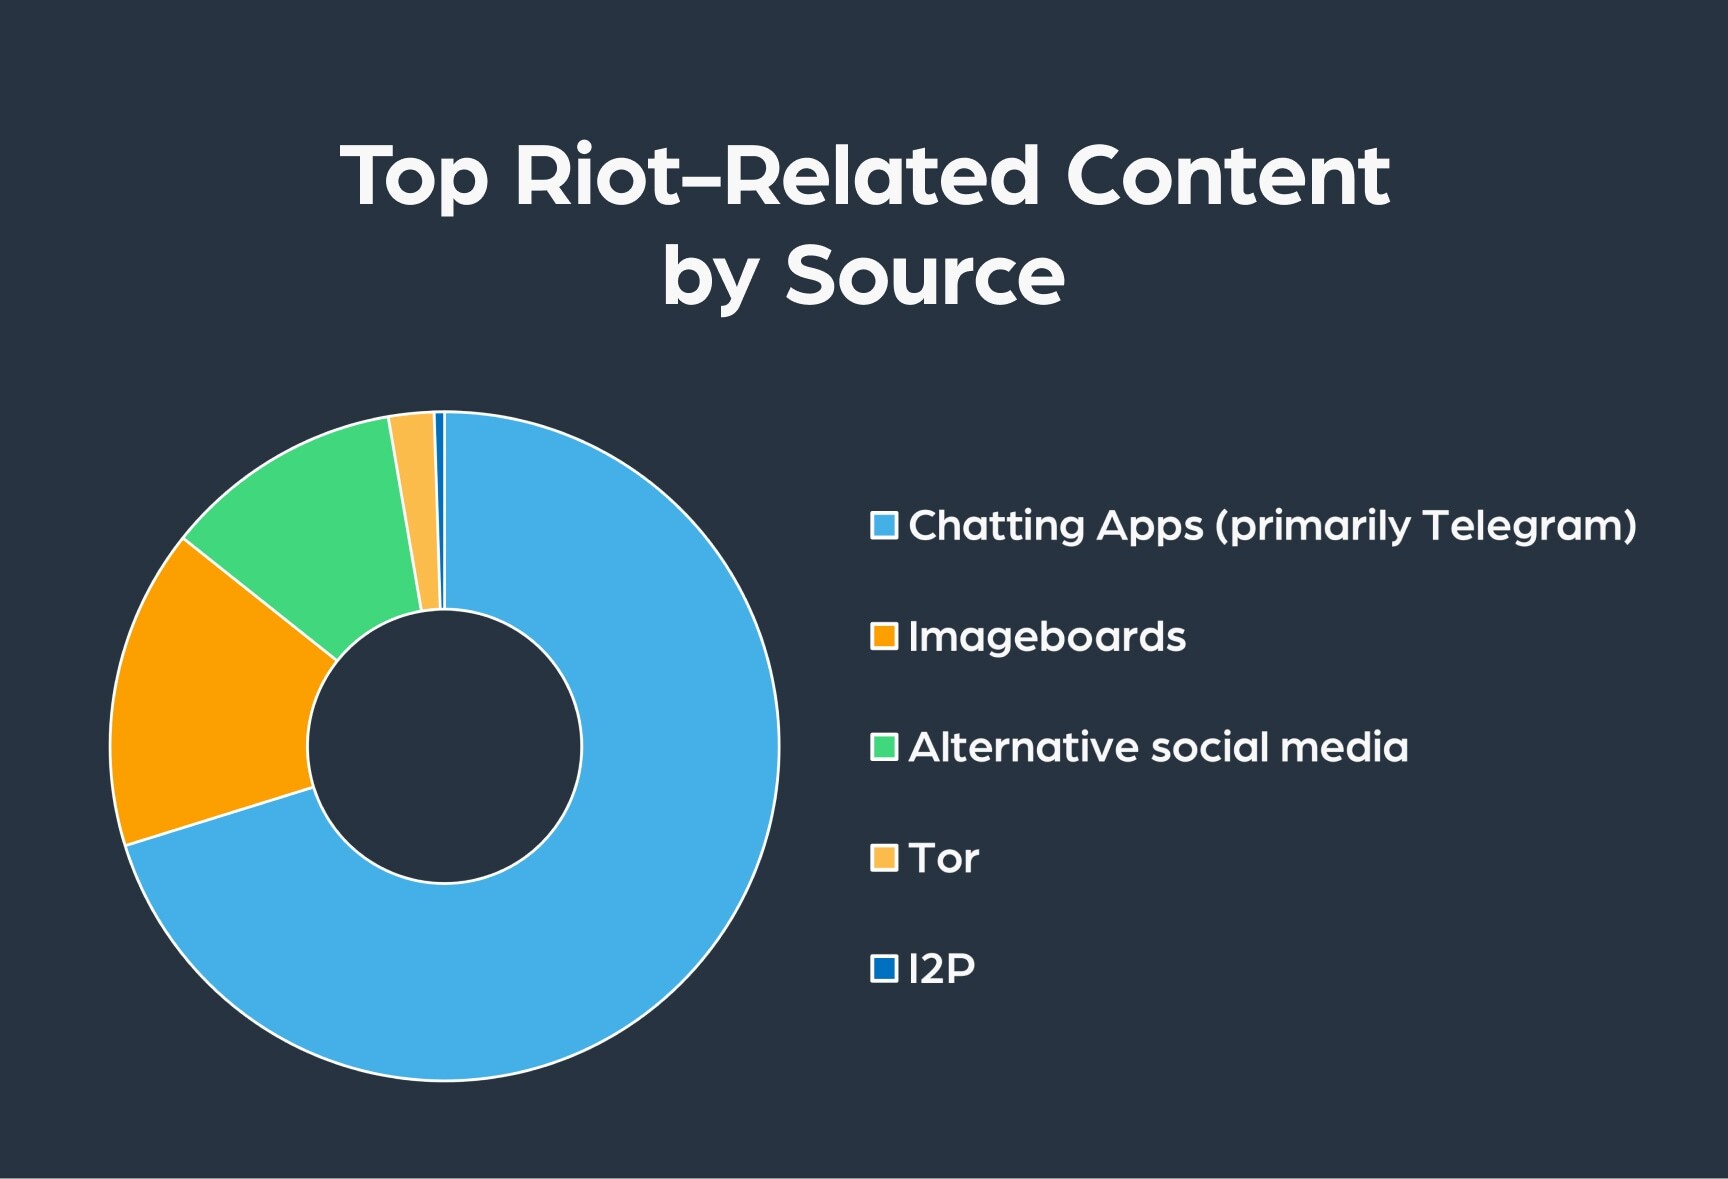 Top sources with riot-related content